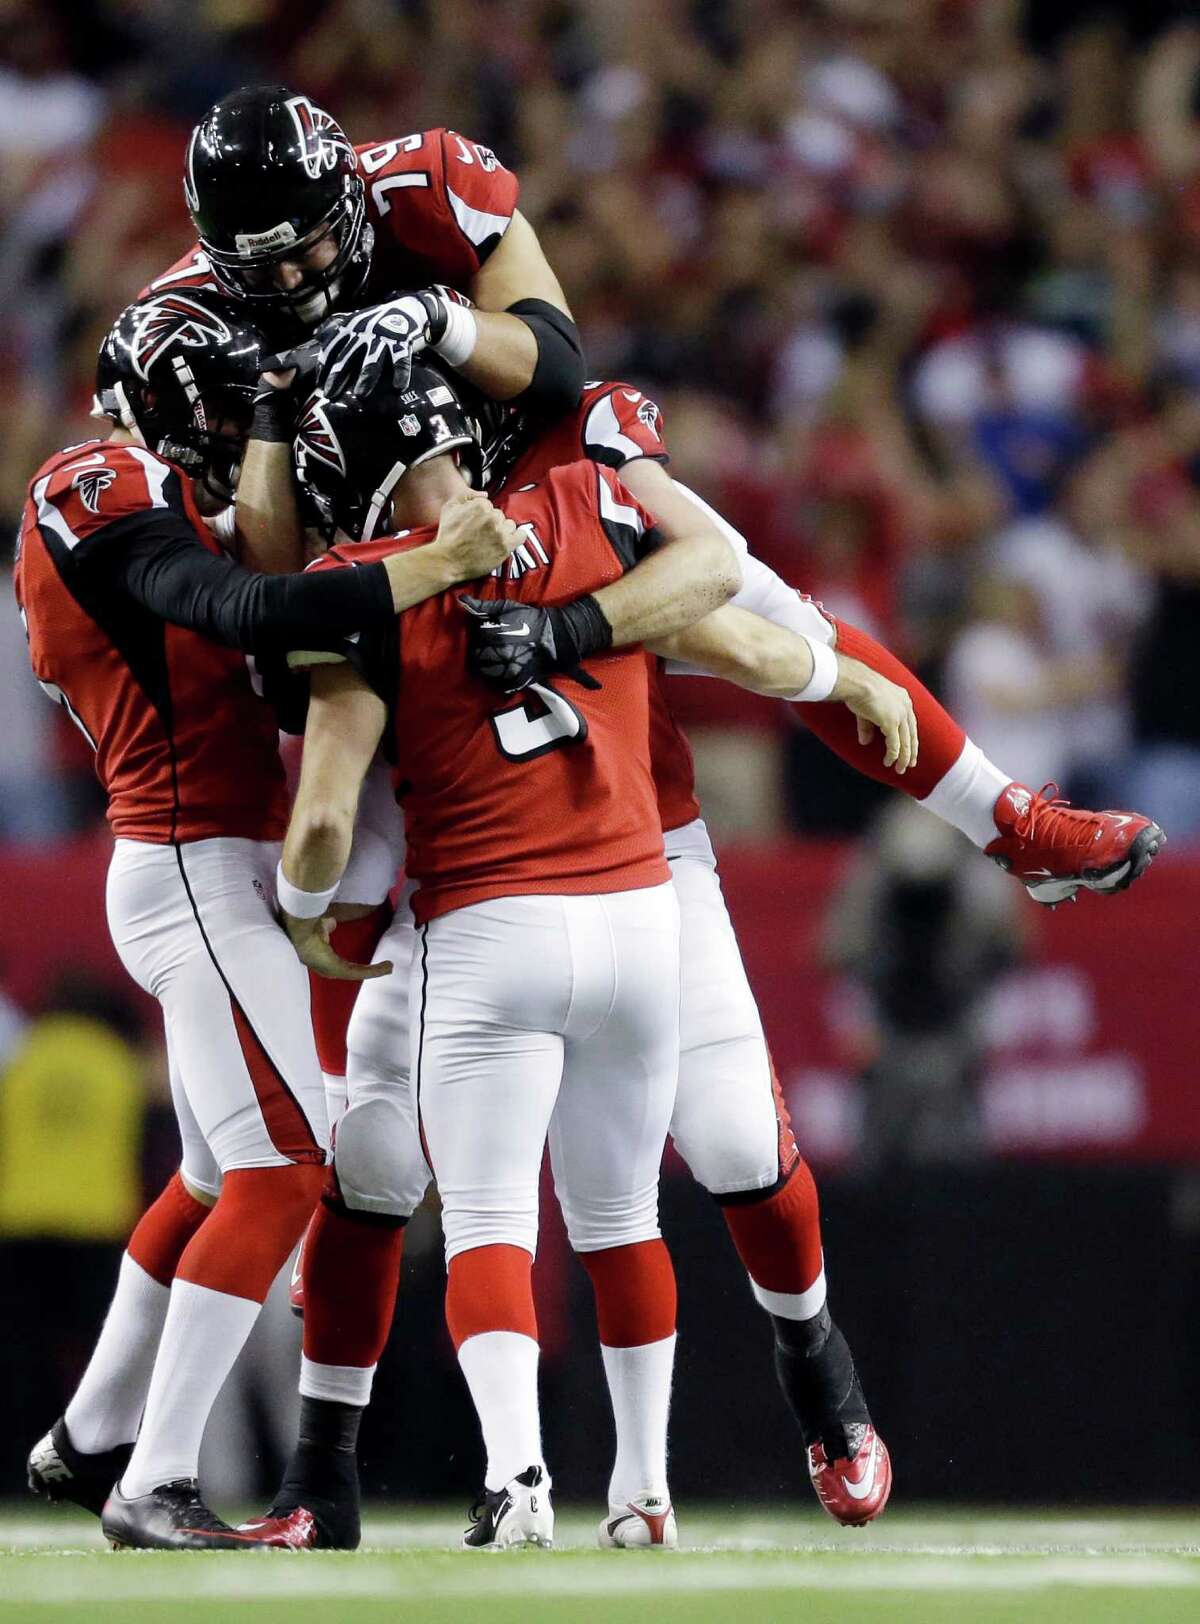 Atlanta Falcons kicker Matt Bryant (3) is congratulated by teammates after making the game-winning field goal during the second half of an NFC divisional playoff NFL football game against the Seattle Seahawks Sunday, Jan. 13, 2013, in Atlanta. The Falcons won 30-28. (AP Photo/David Goldman)